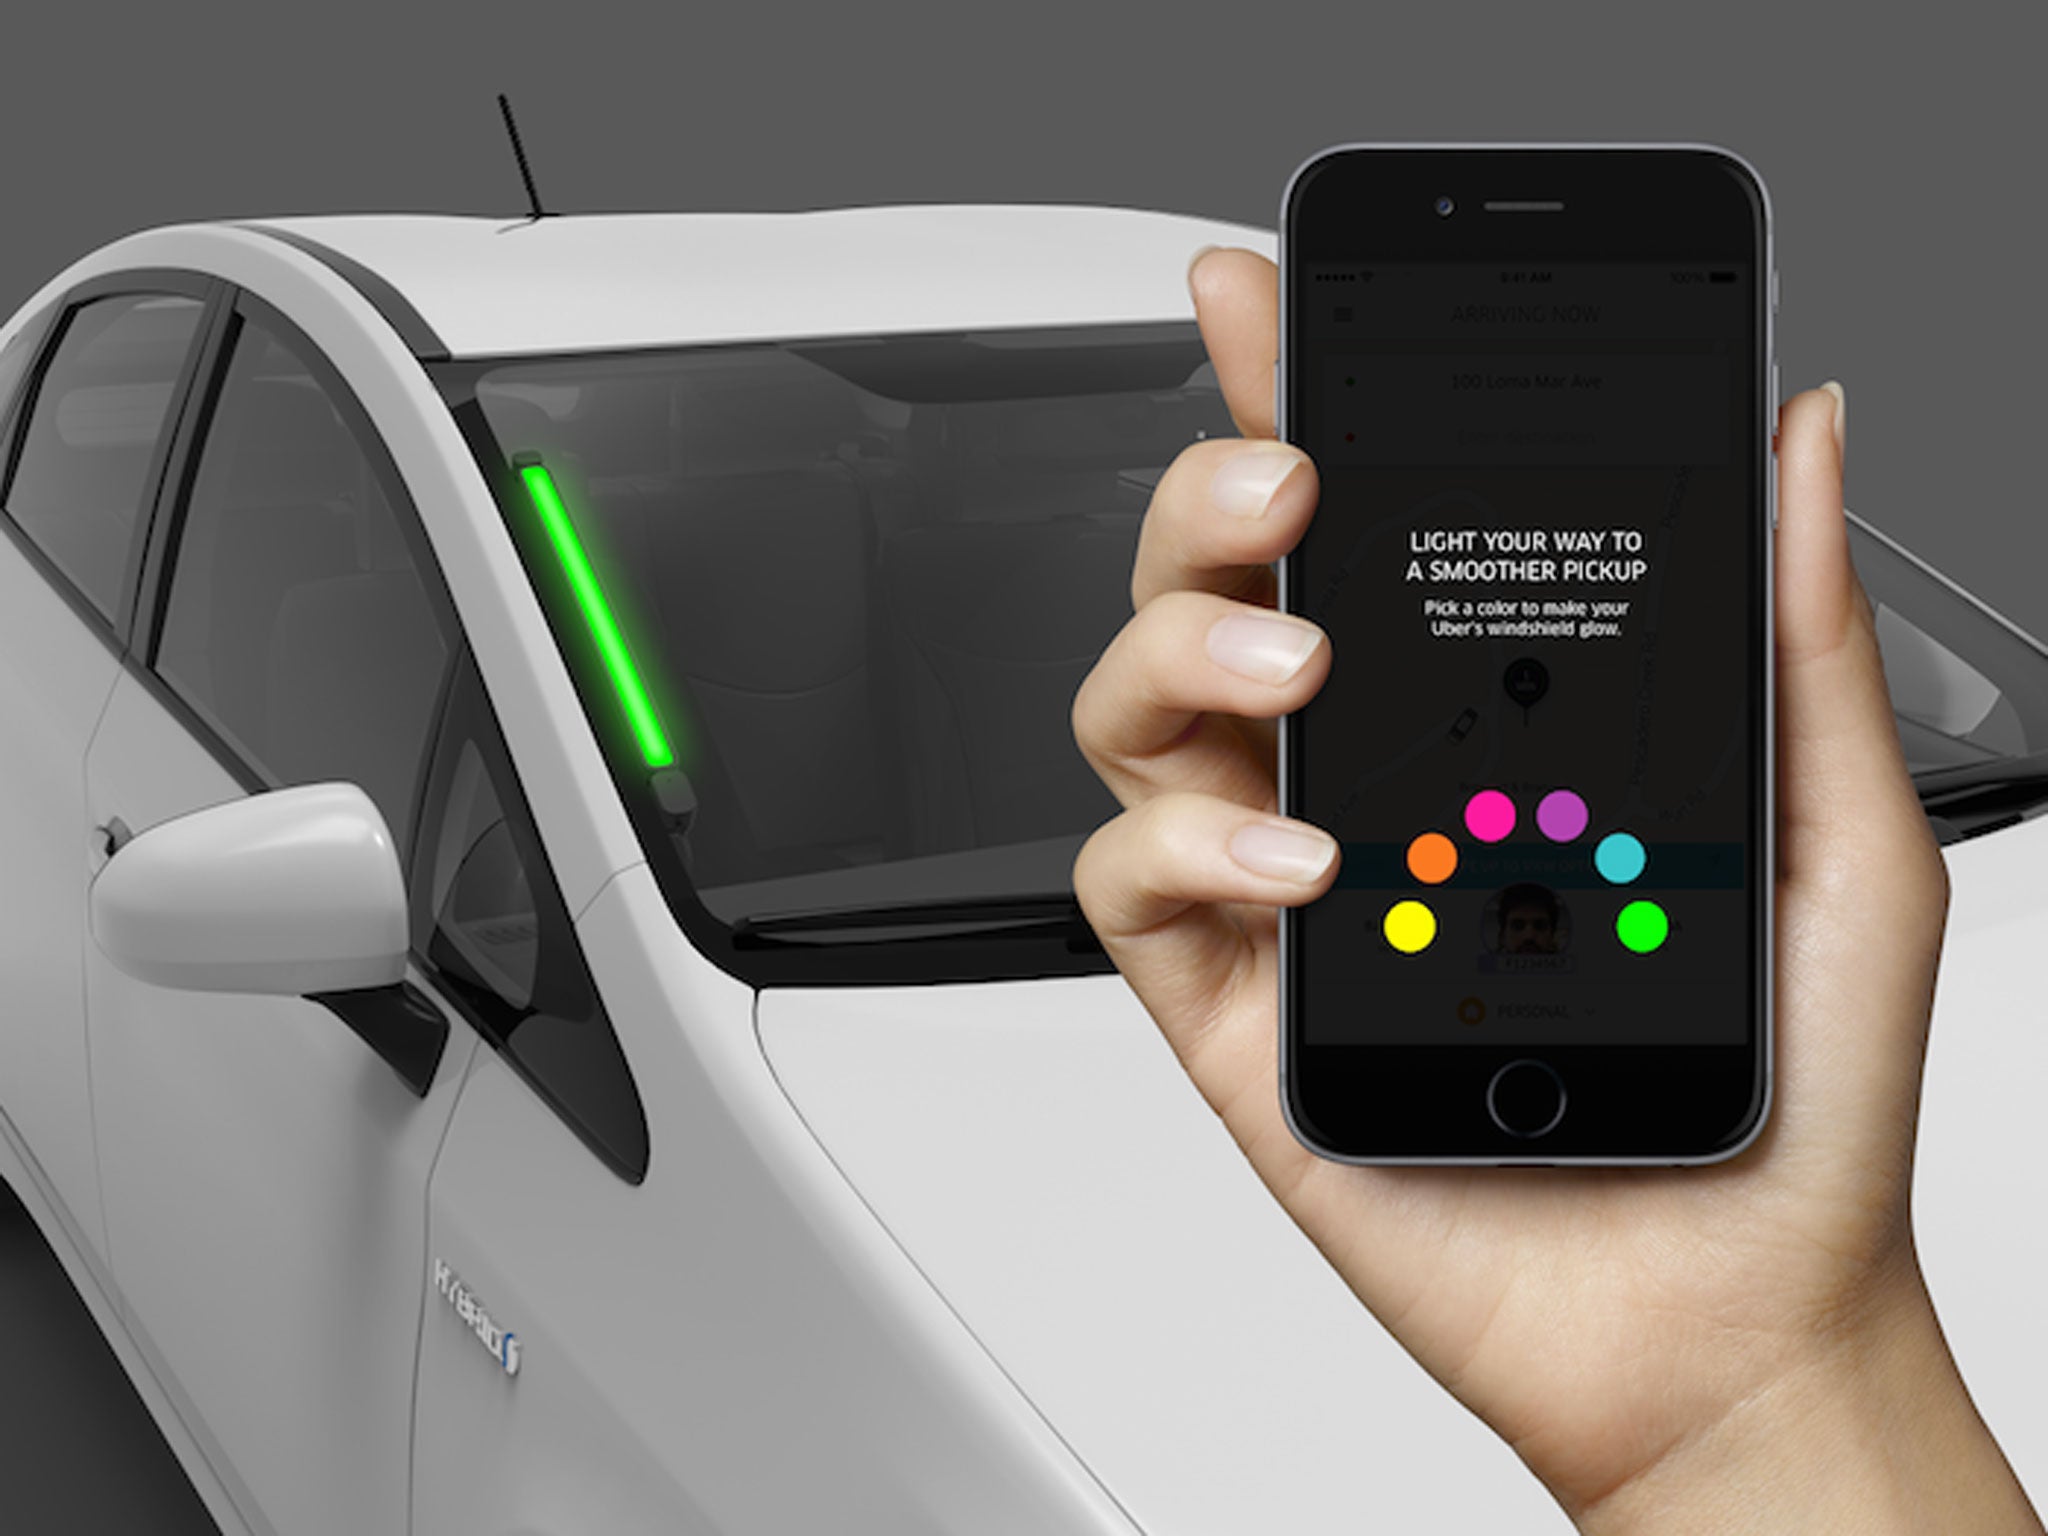 The technology, called SPOT, allows riders and drivers to connect through the use of color.